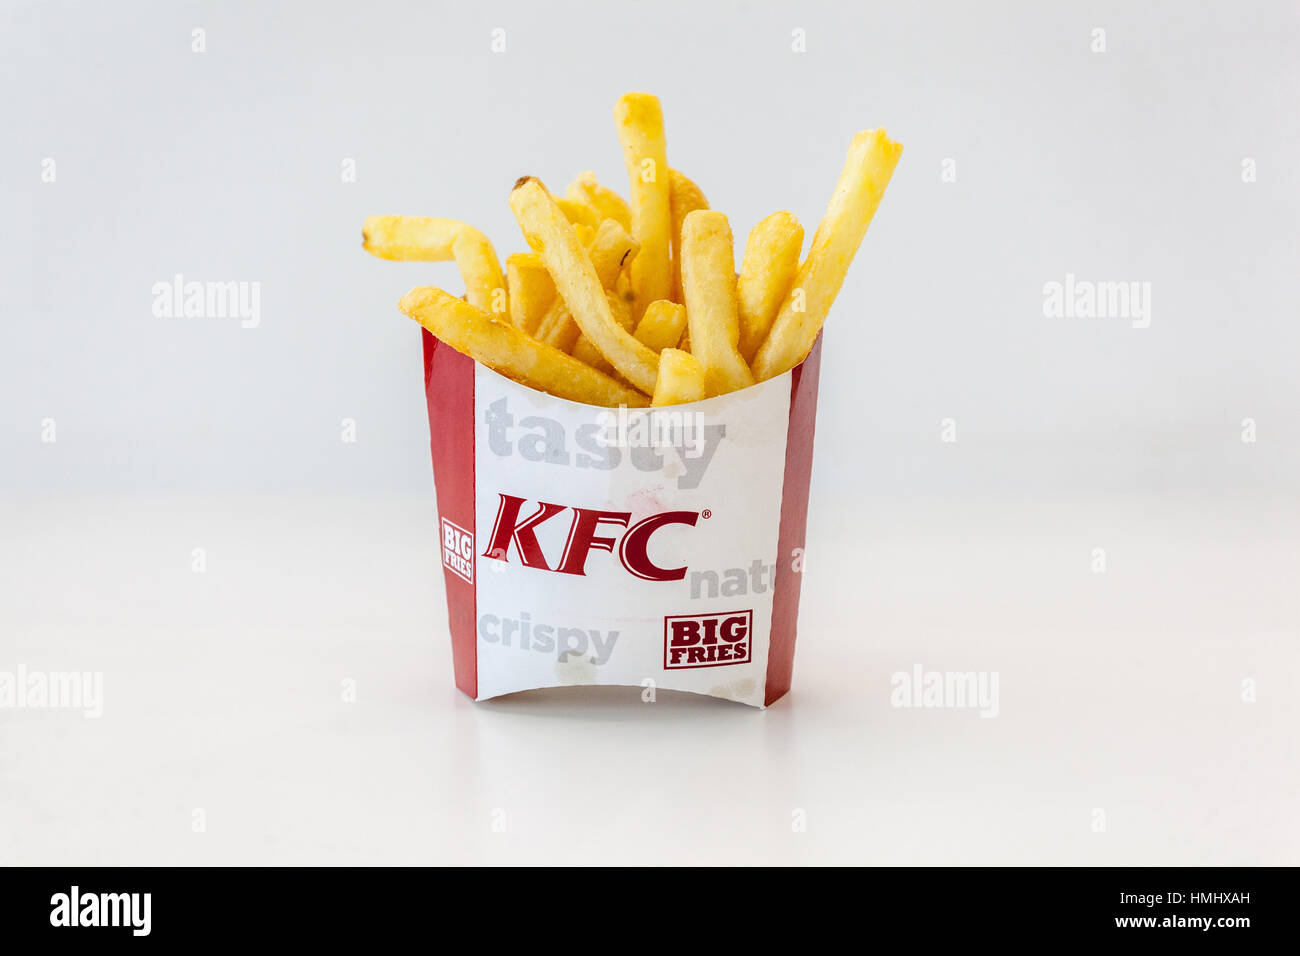 KFC meal, Kentucky Fried Chicken, French fries Stock Photo